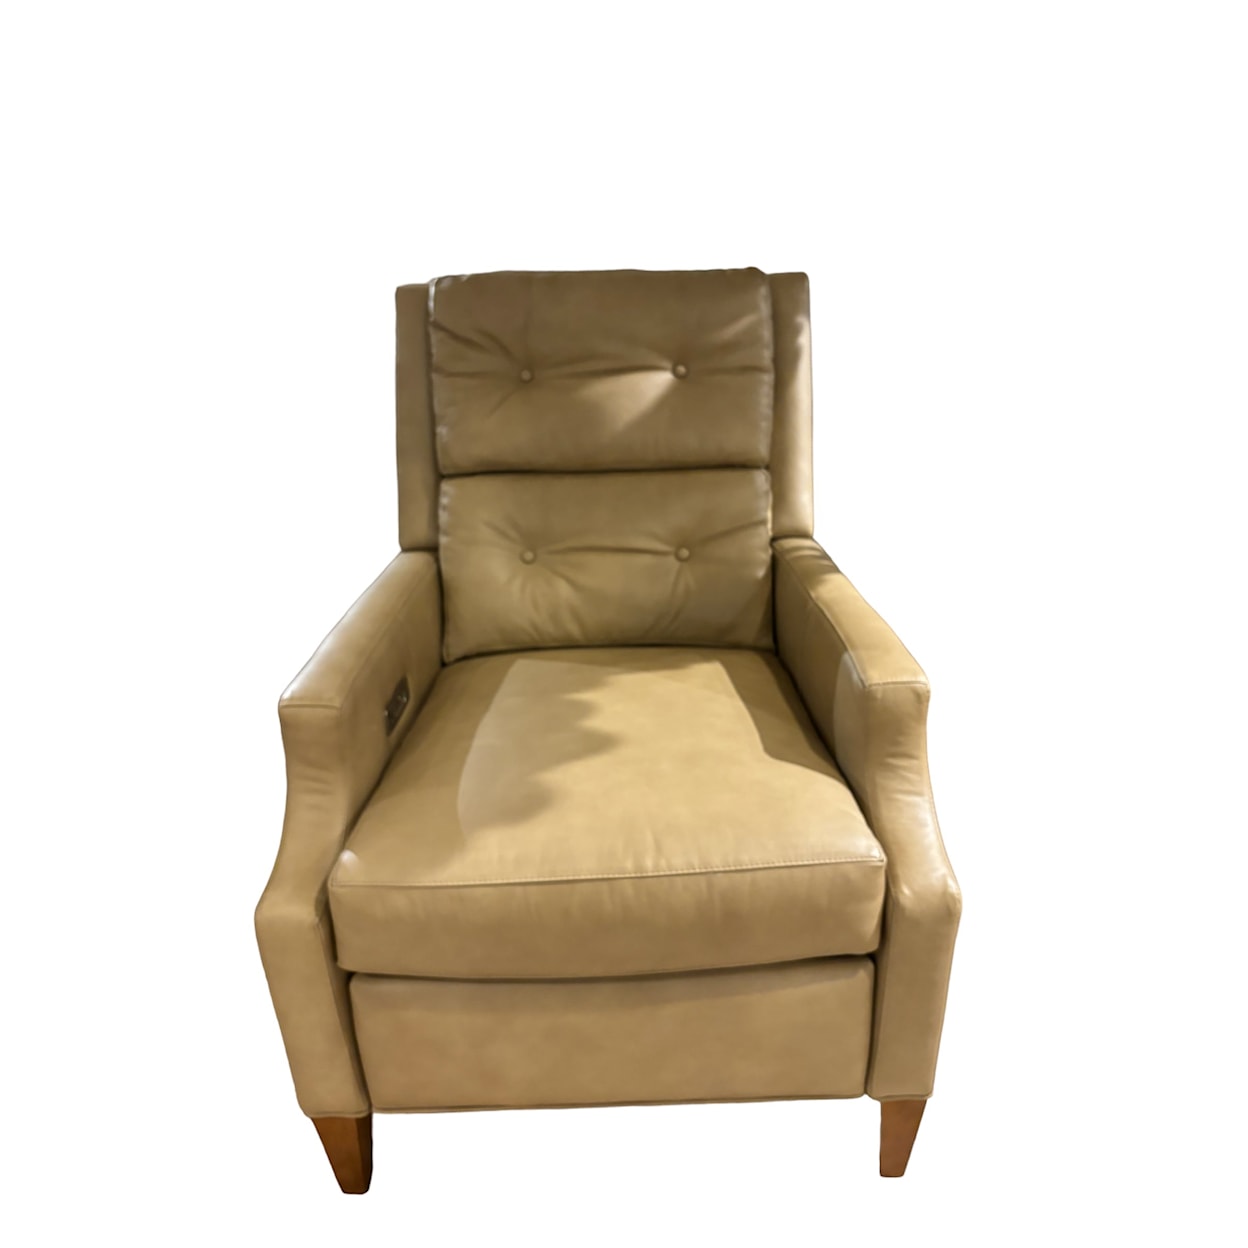 MotionCraft by Sherrill Motioncraft Collection 4205 Emerson Recliner